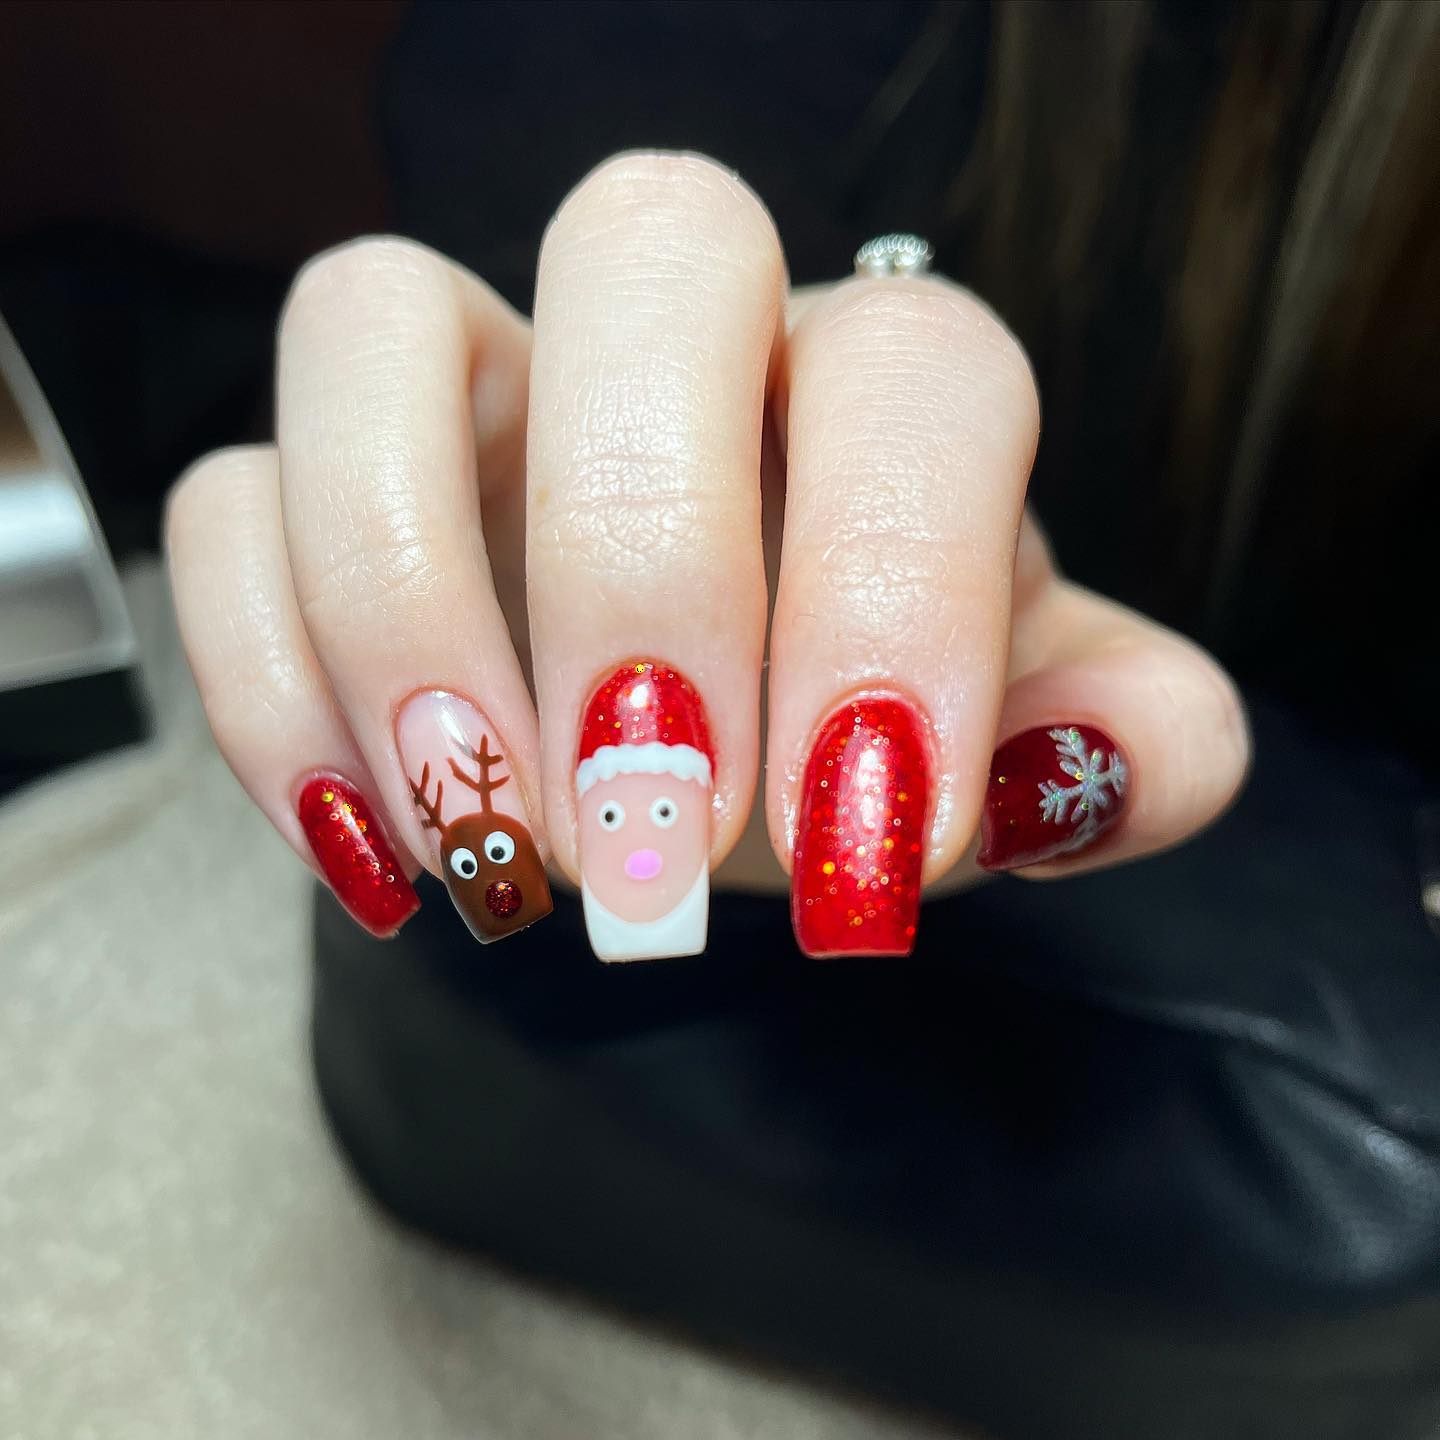 Reindeer Nails: The Cutest Holiday Season Trend - Nail Designs Daily